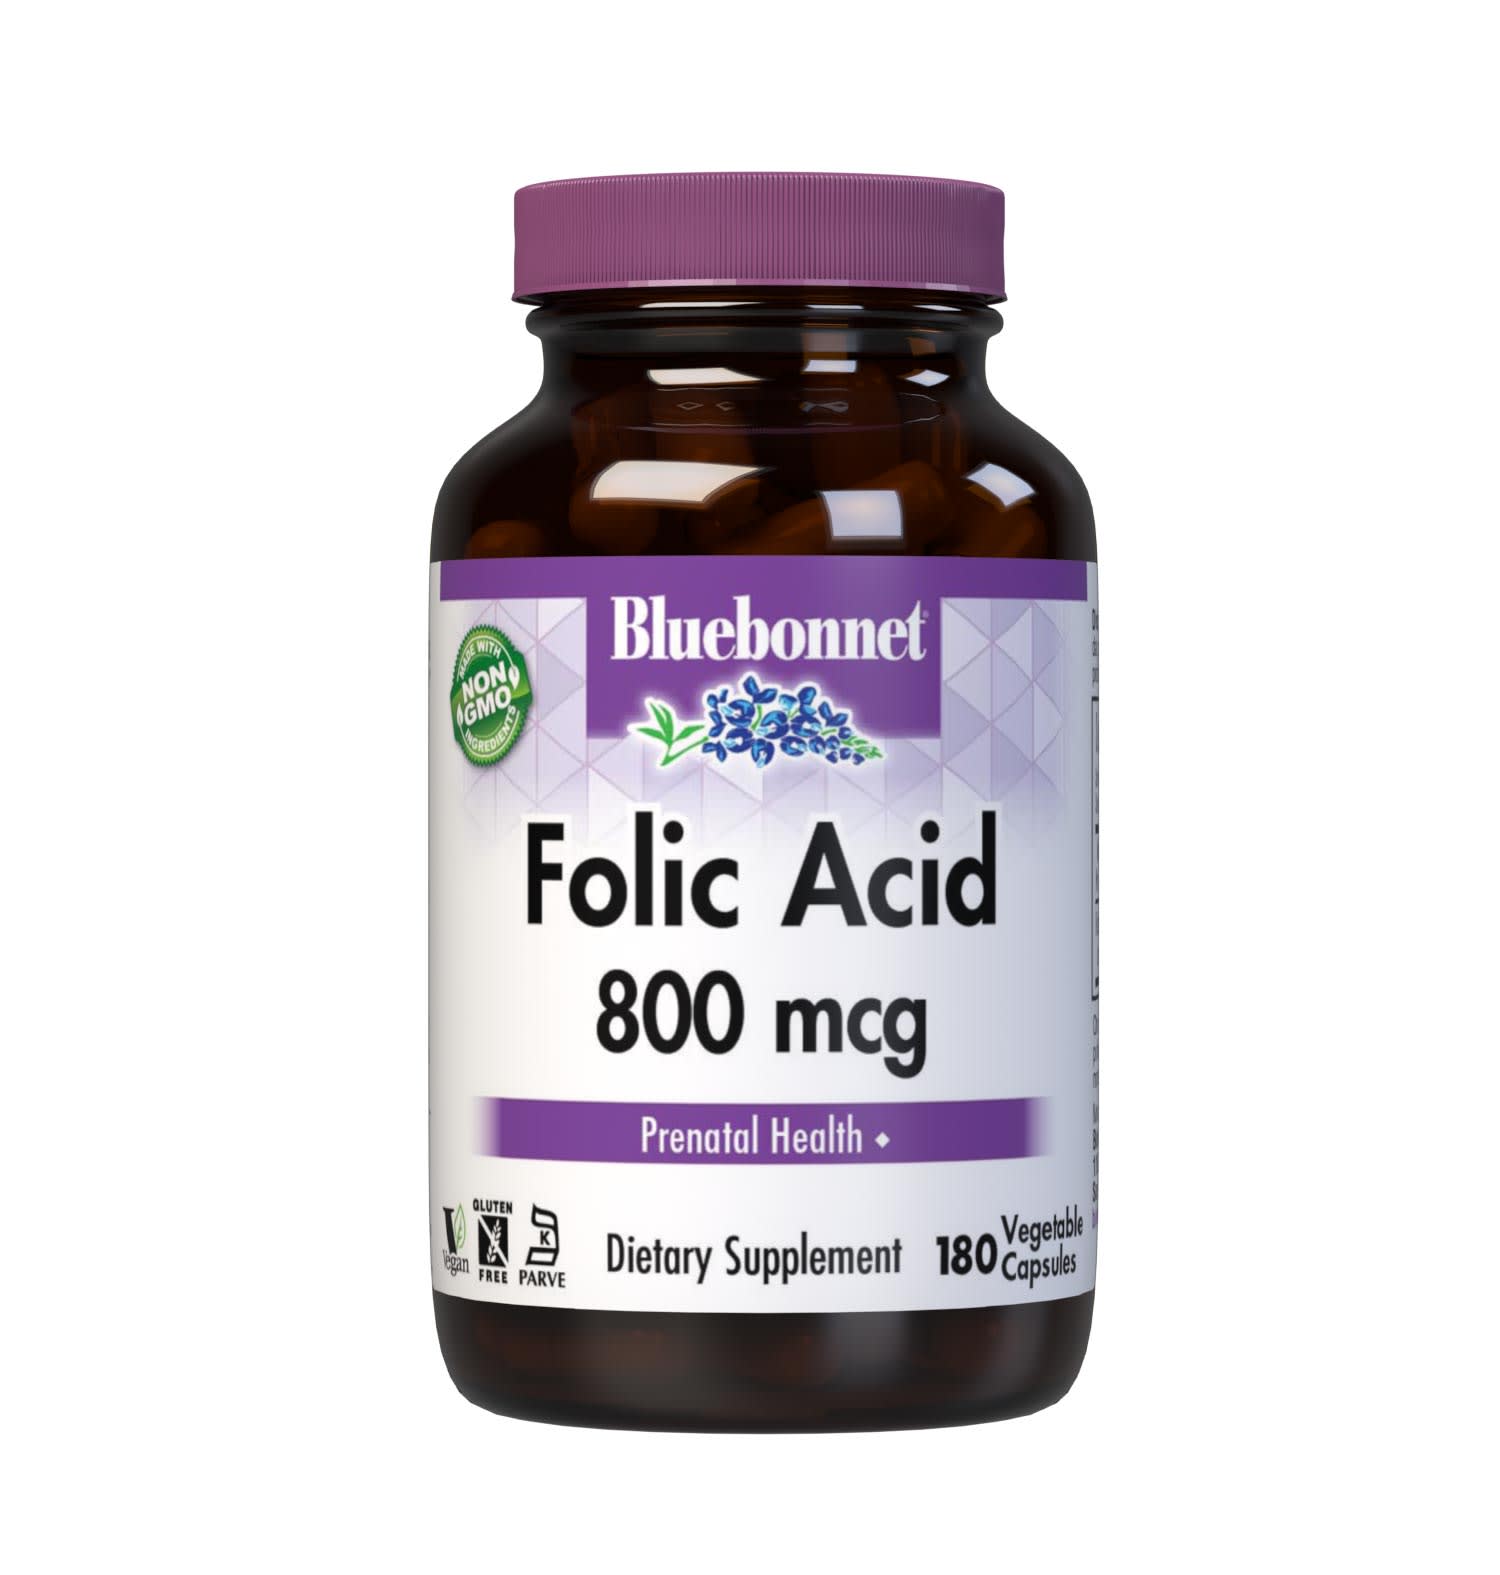 Bluebonnet’s Folic Acid 800 mcg Vegetable Capsules are formulated with folate in its crystalline form which may help support neural tube development. #size_180 count